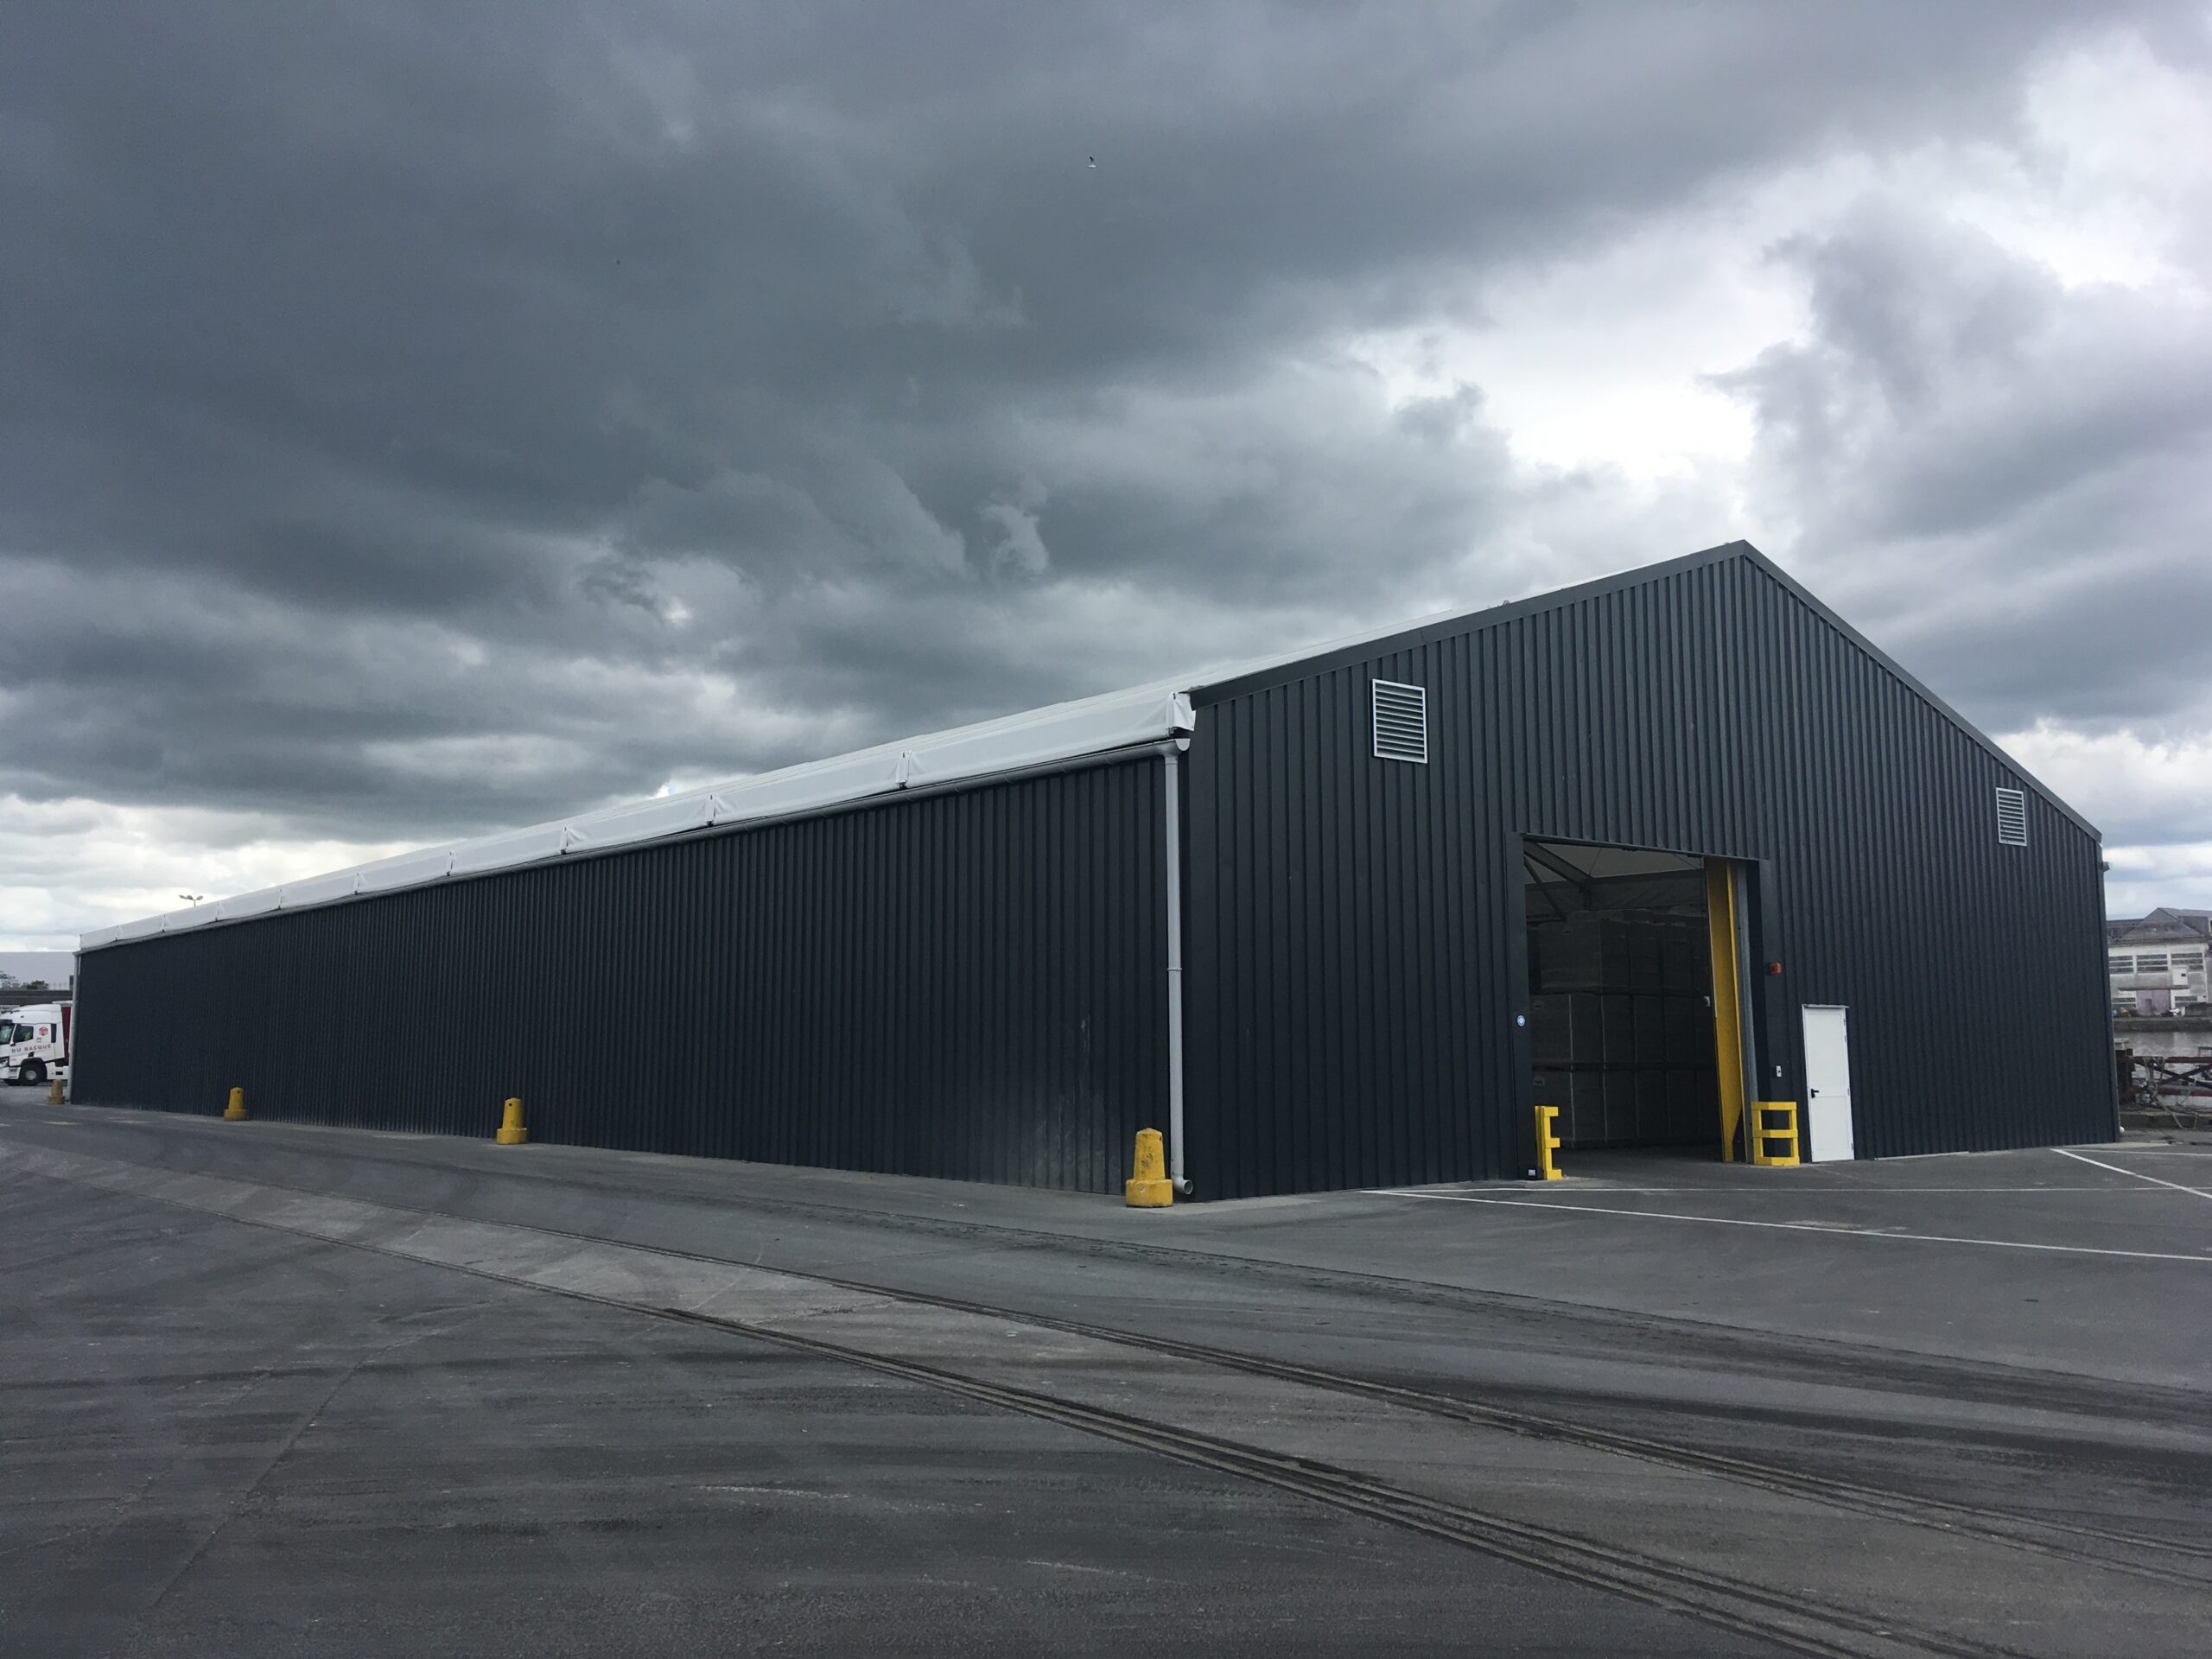 Lauralu completed temporary buildings and modular structures